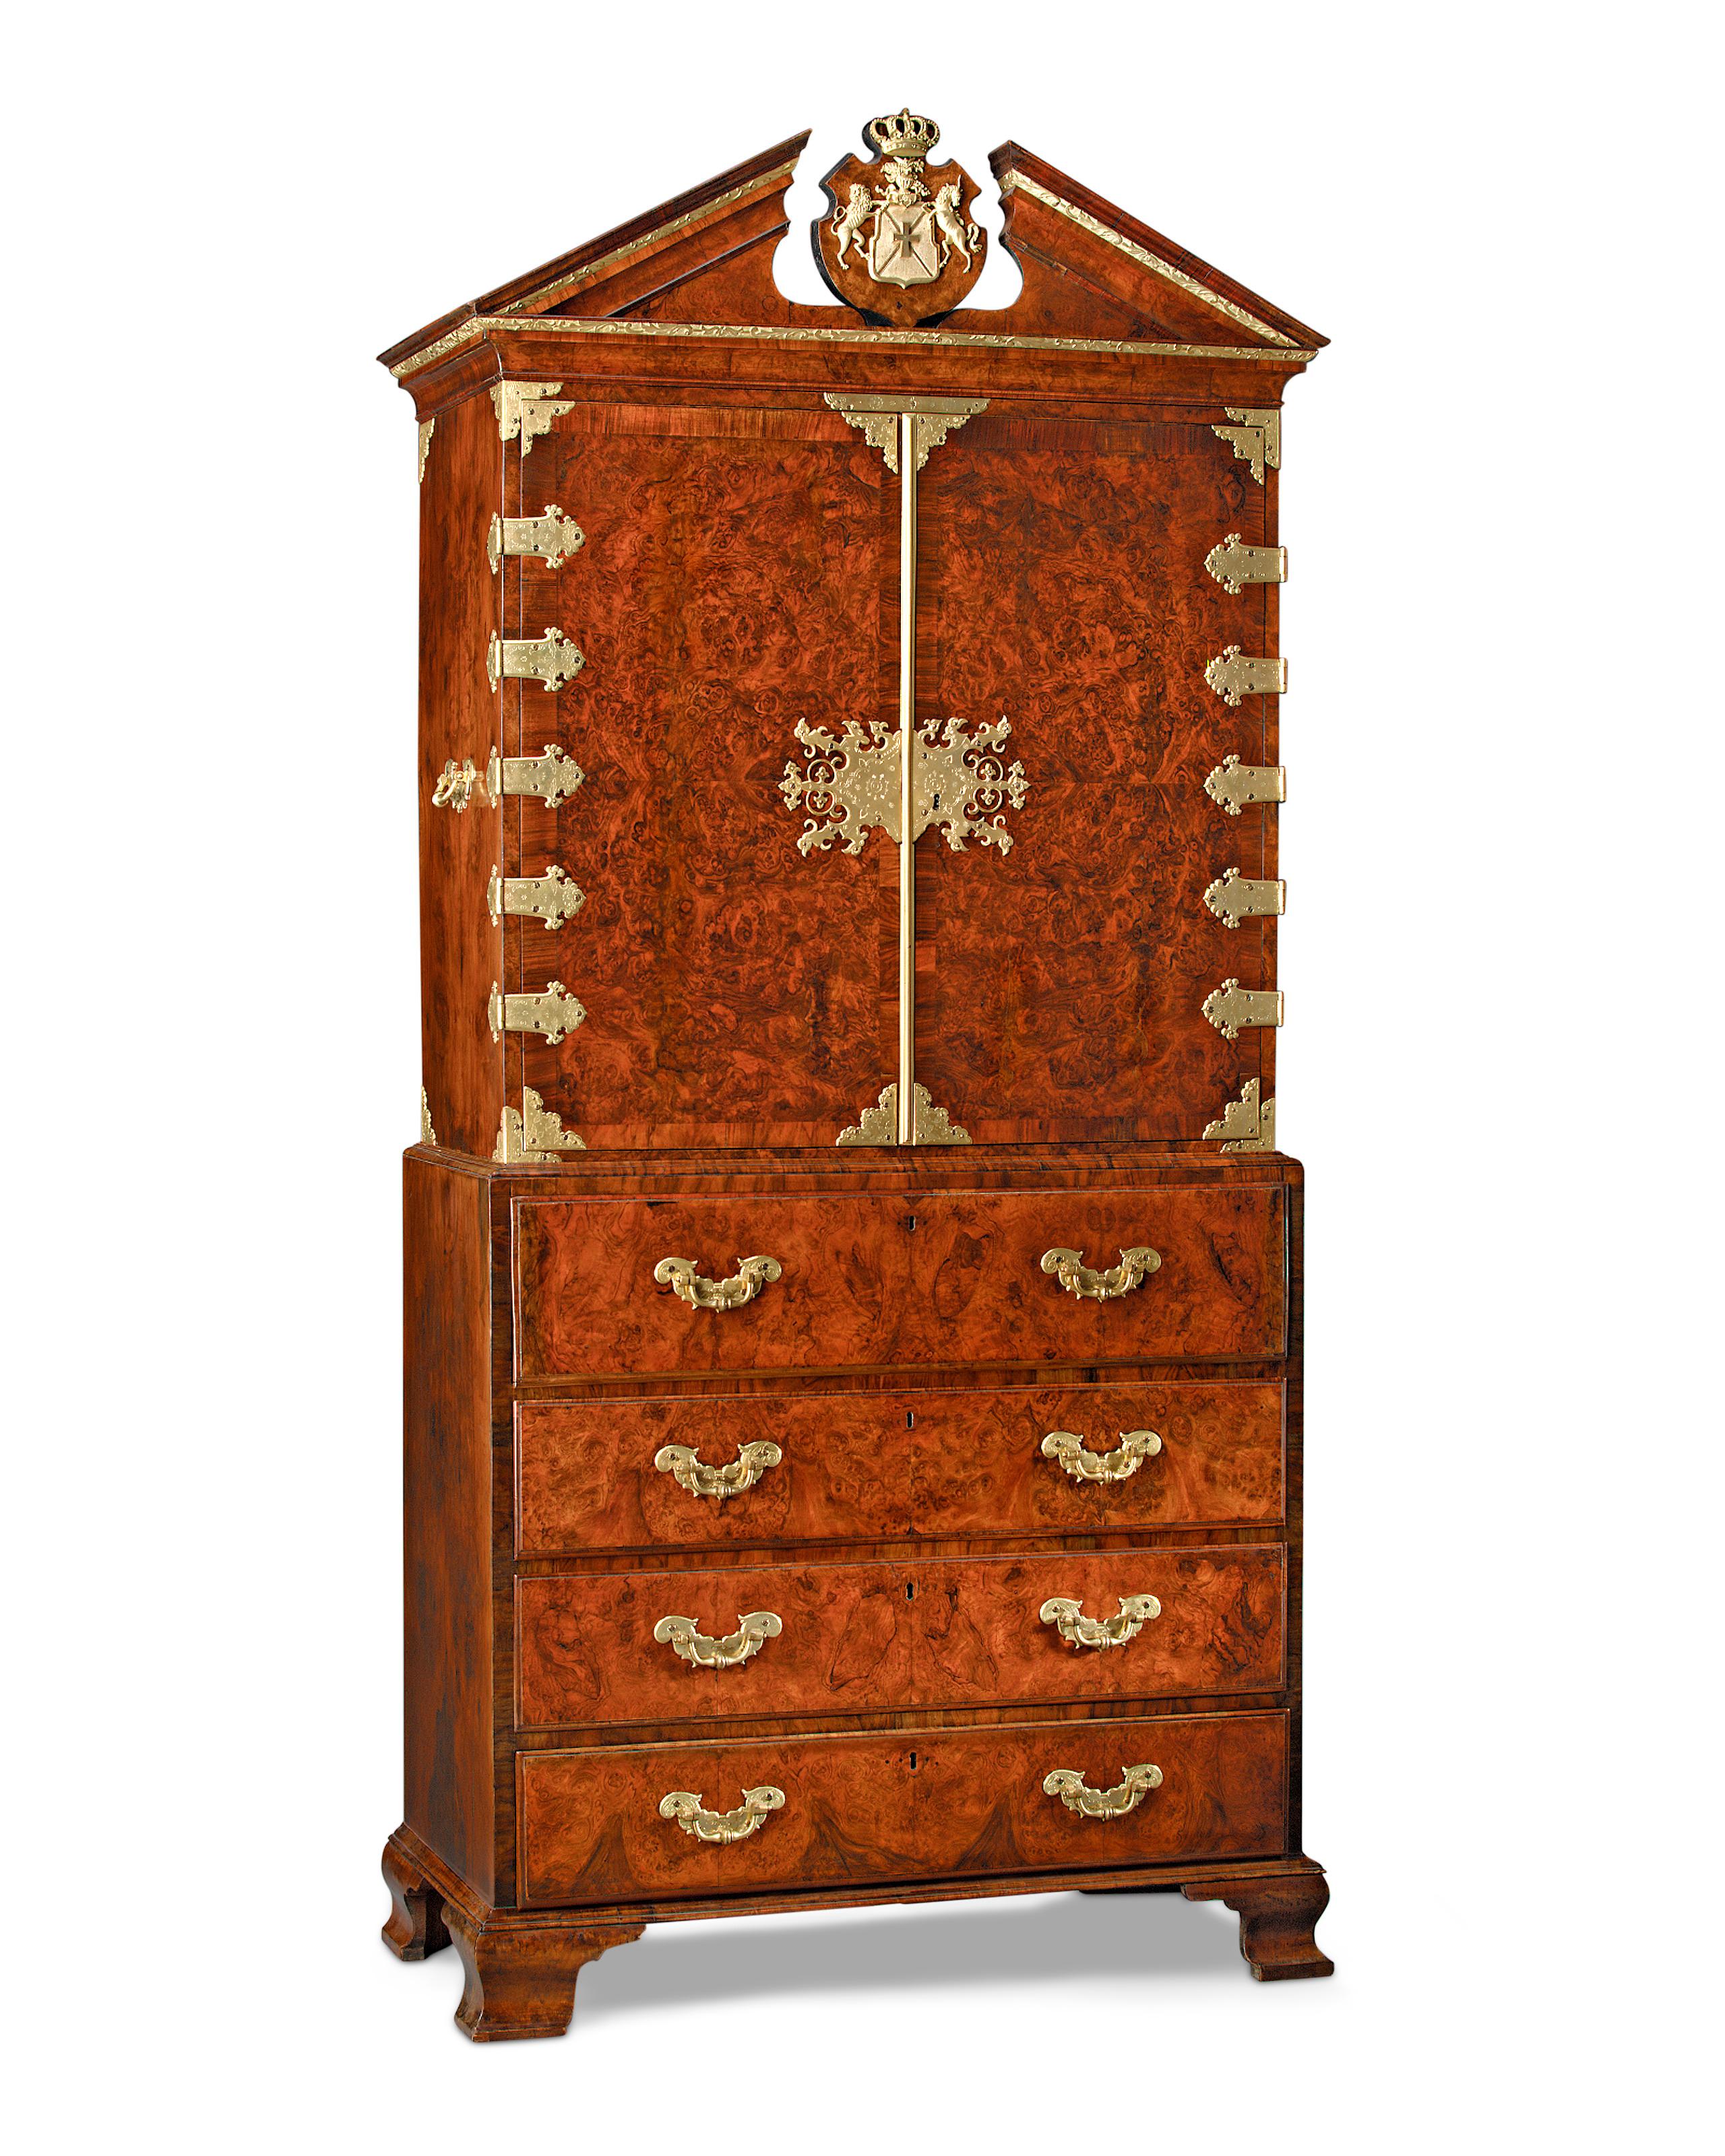 This highly important secrétaire-cabinet was crafted for and specially ordered by King George I for the British Ambassador to Russia. From its craftsmanship and materials to its exceptional artistry, it is a work of royal and historic significance